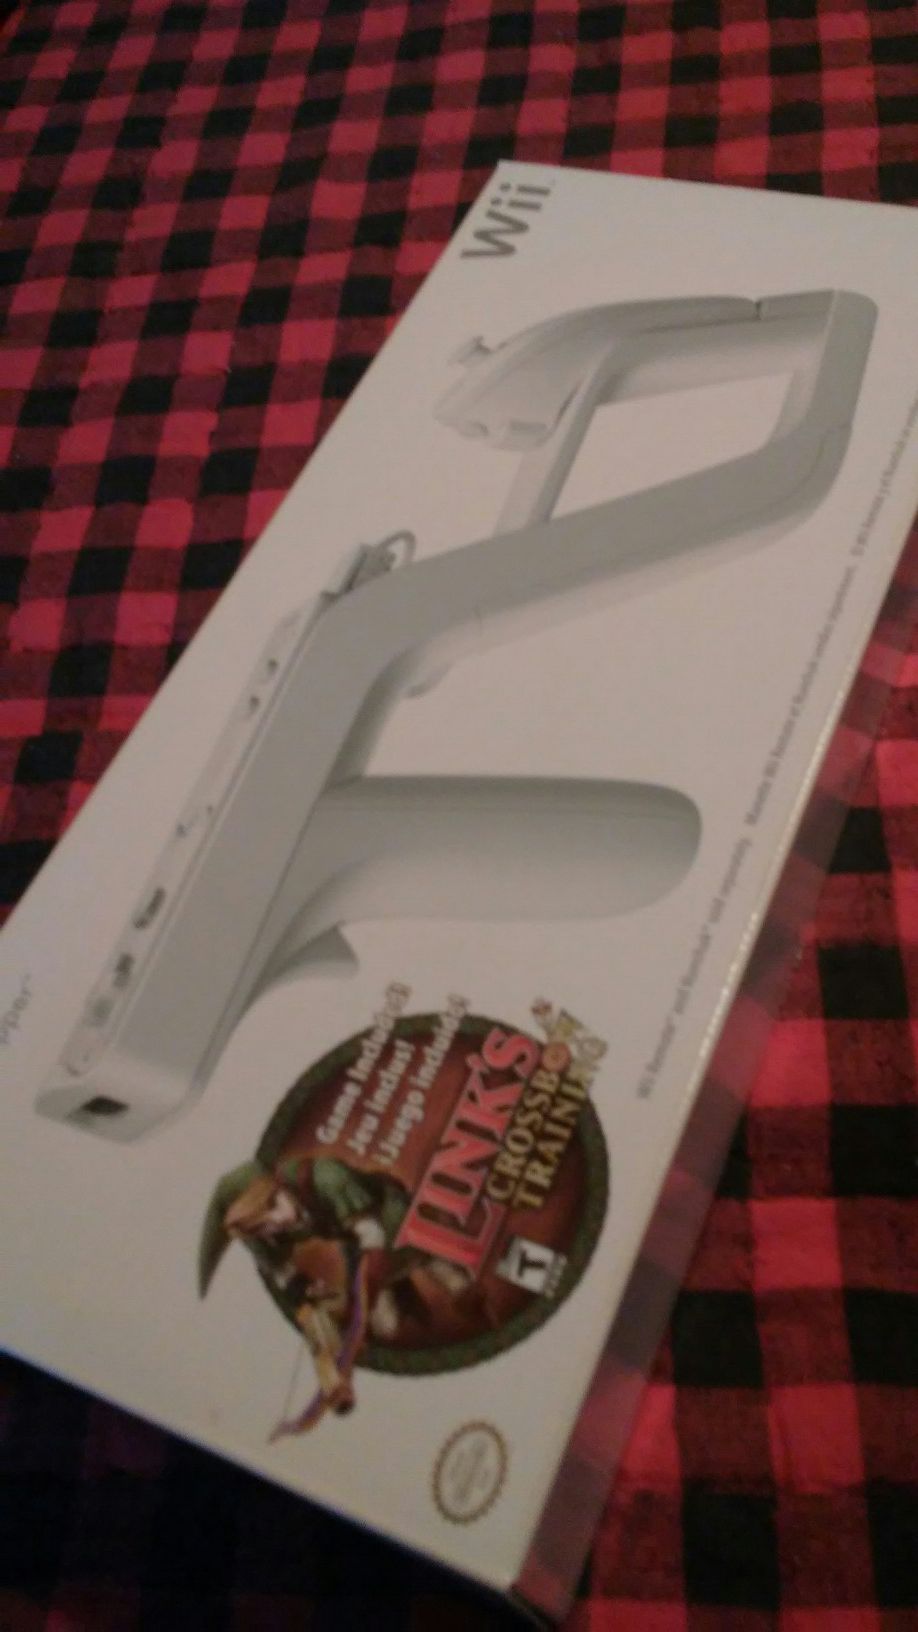 Wii gun and game.